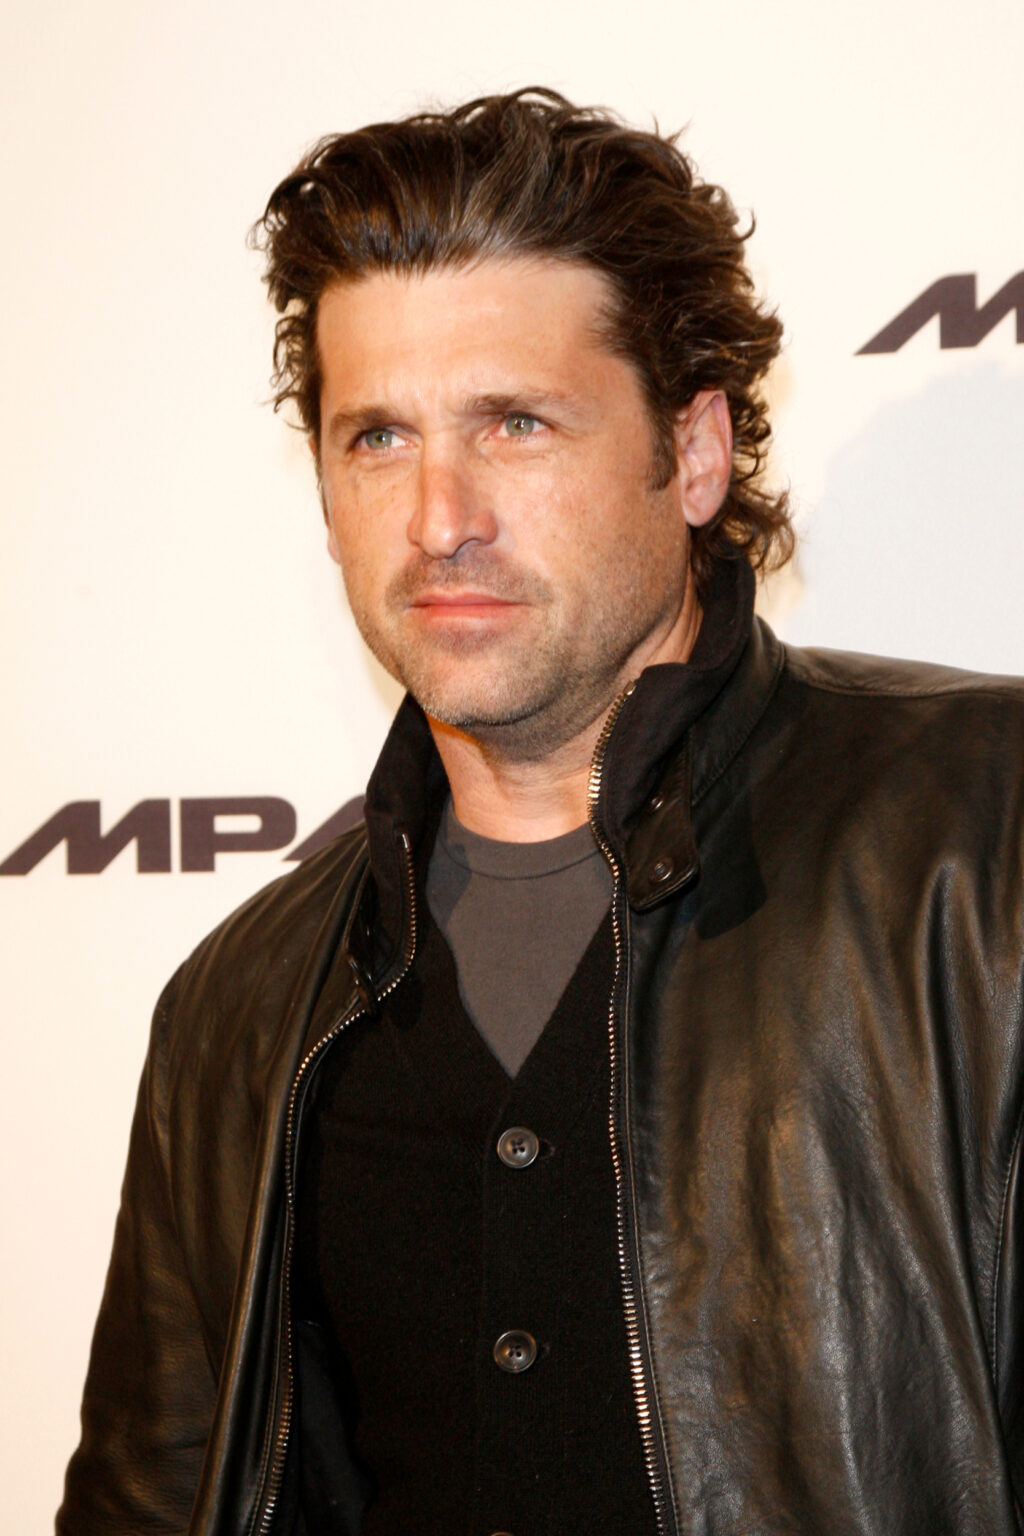 Does Patrick Dempsey Have A Brother?